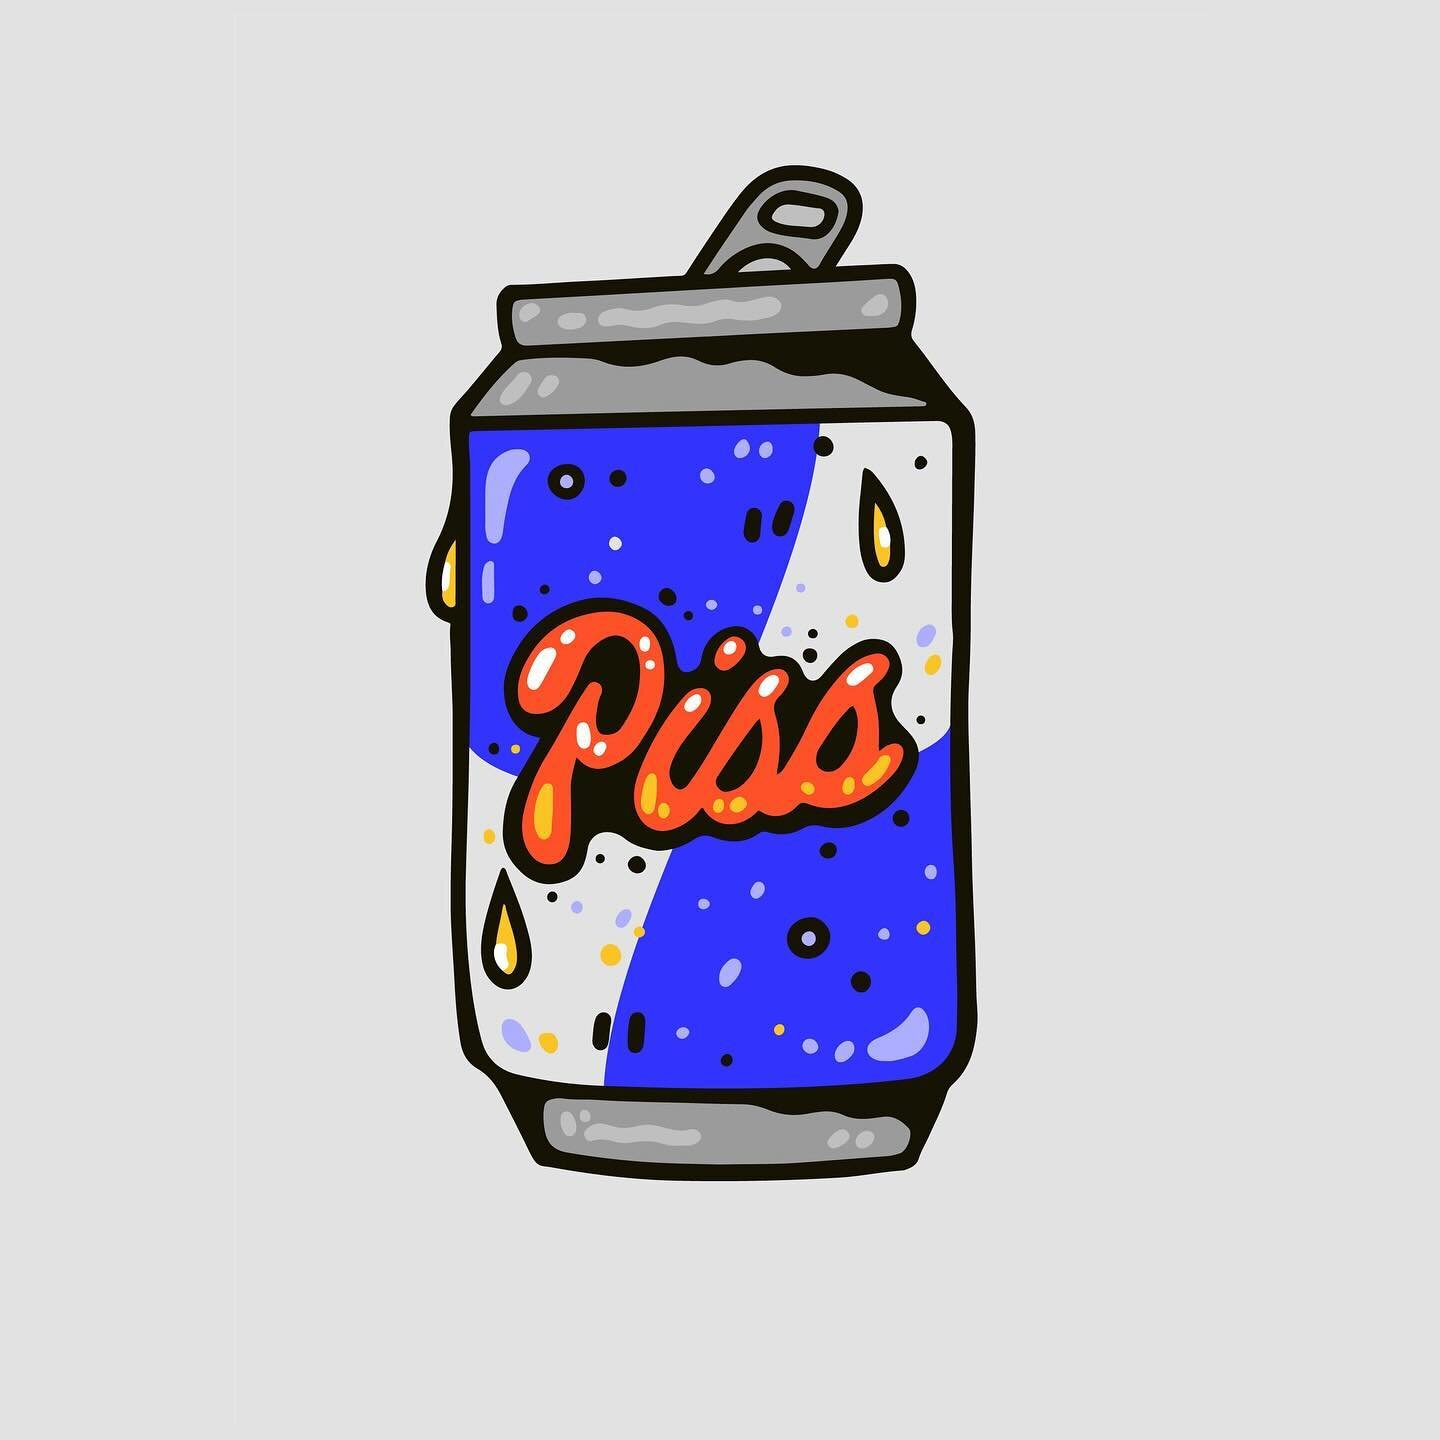 new energy variant 🚨

should I get some piss can charms made? last time I got some &ldquo;a very good boy&rdquo; charms

comment 💧 if you'd rock a red bovine piss charm

#piss #sticker #charm #soda #redbull #can #illustration #bigshotrobot